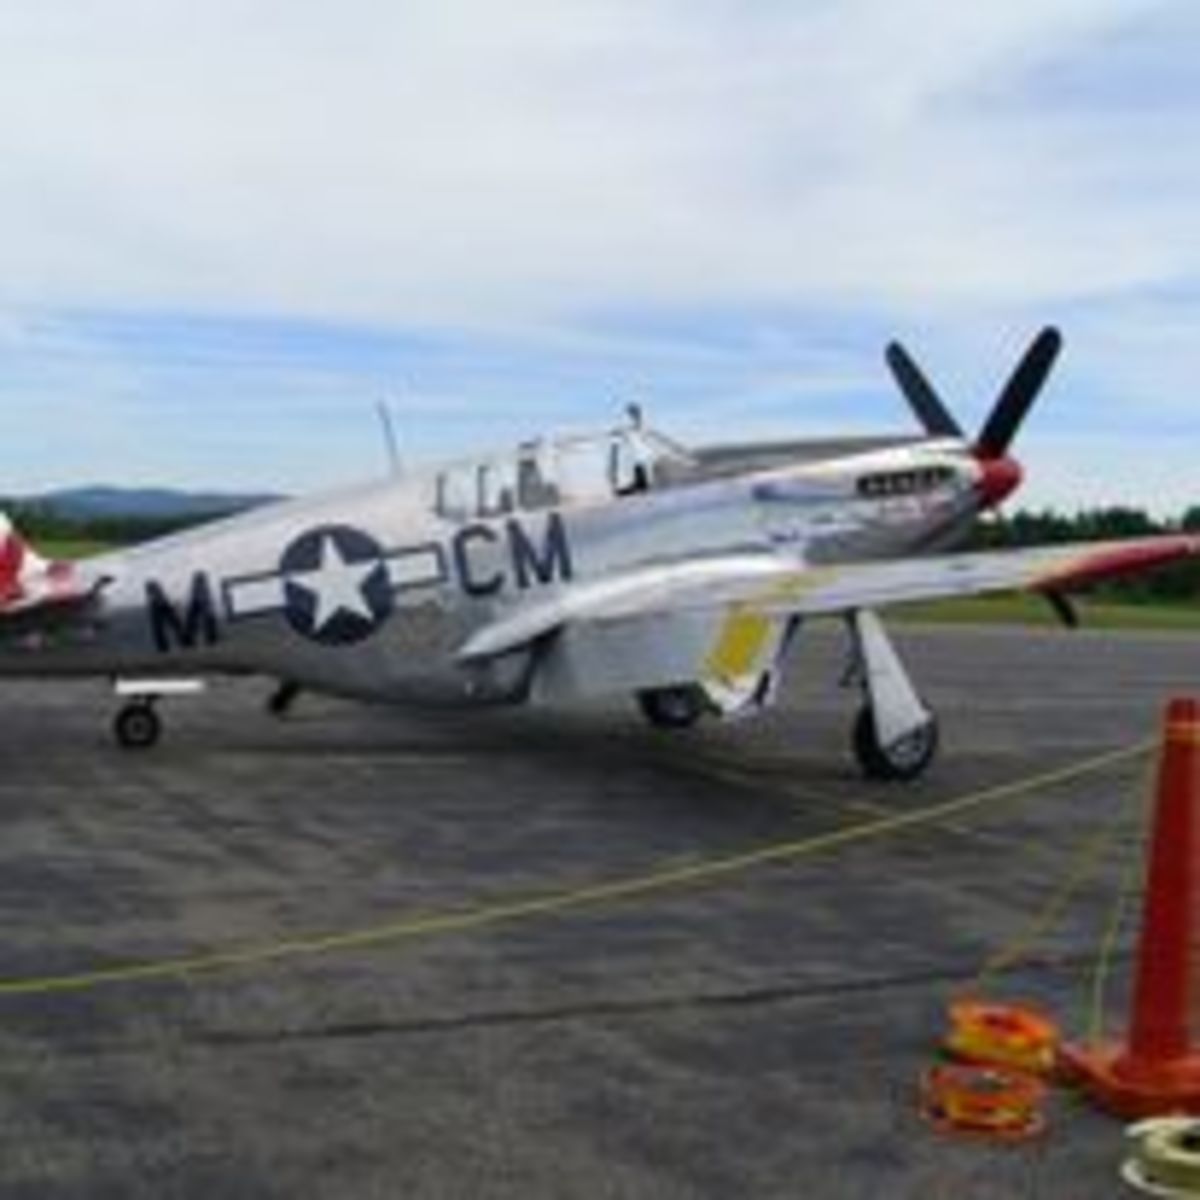 P-51 that we saw and heard at the airshow. Although this is a two-seater verses the single seat fighter, it was still so very impressive.